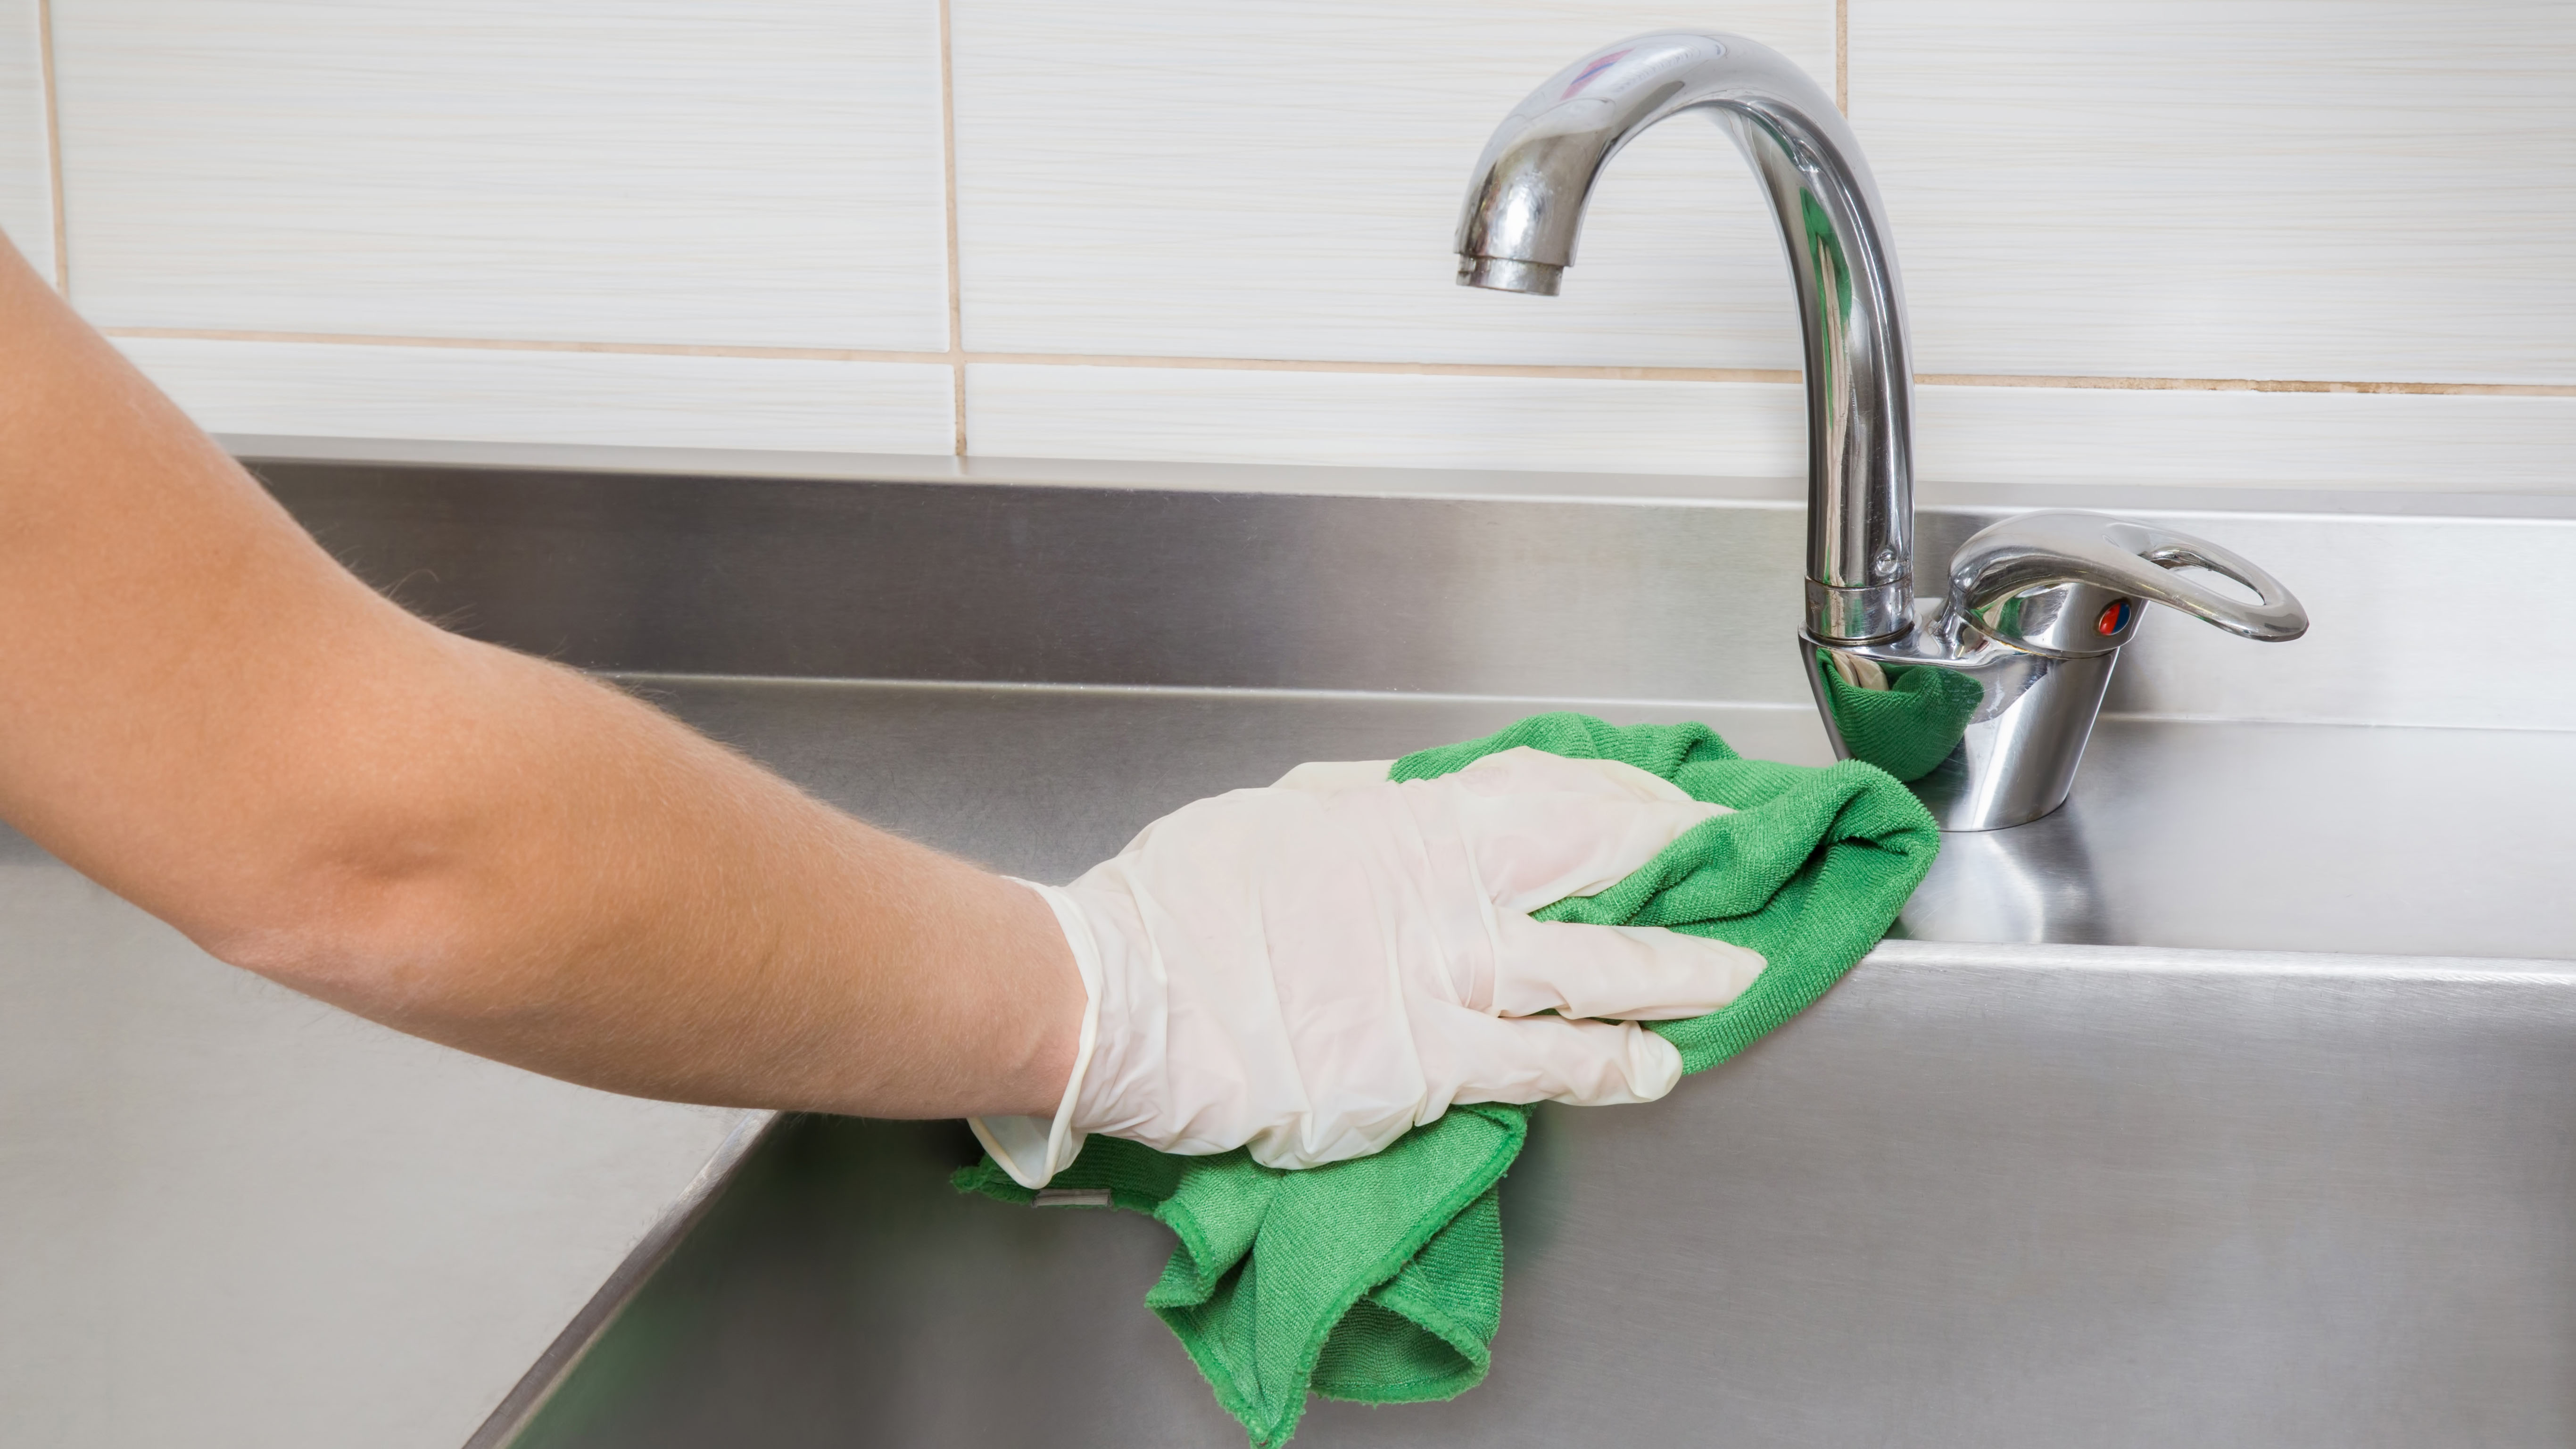 A stainless steel sink that wipes clean while wearing gloves